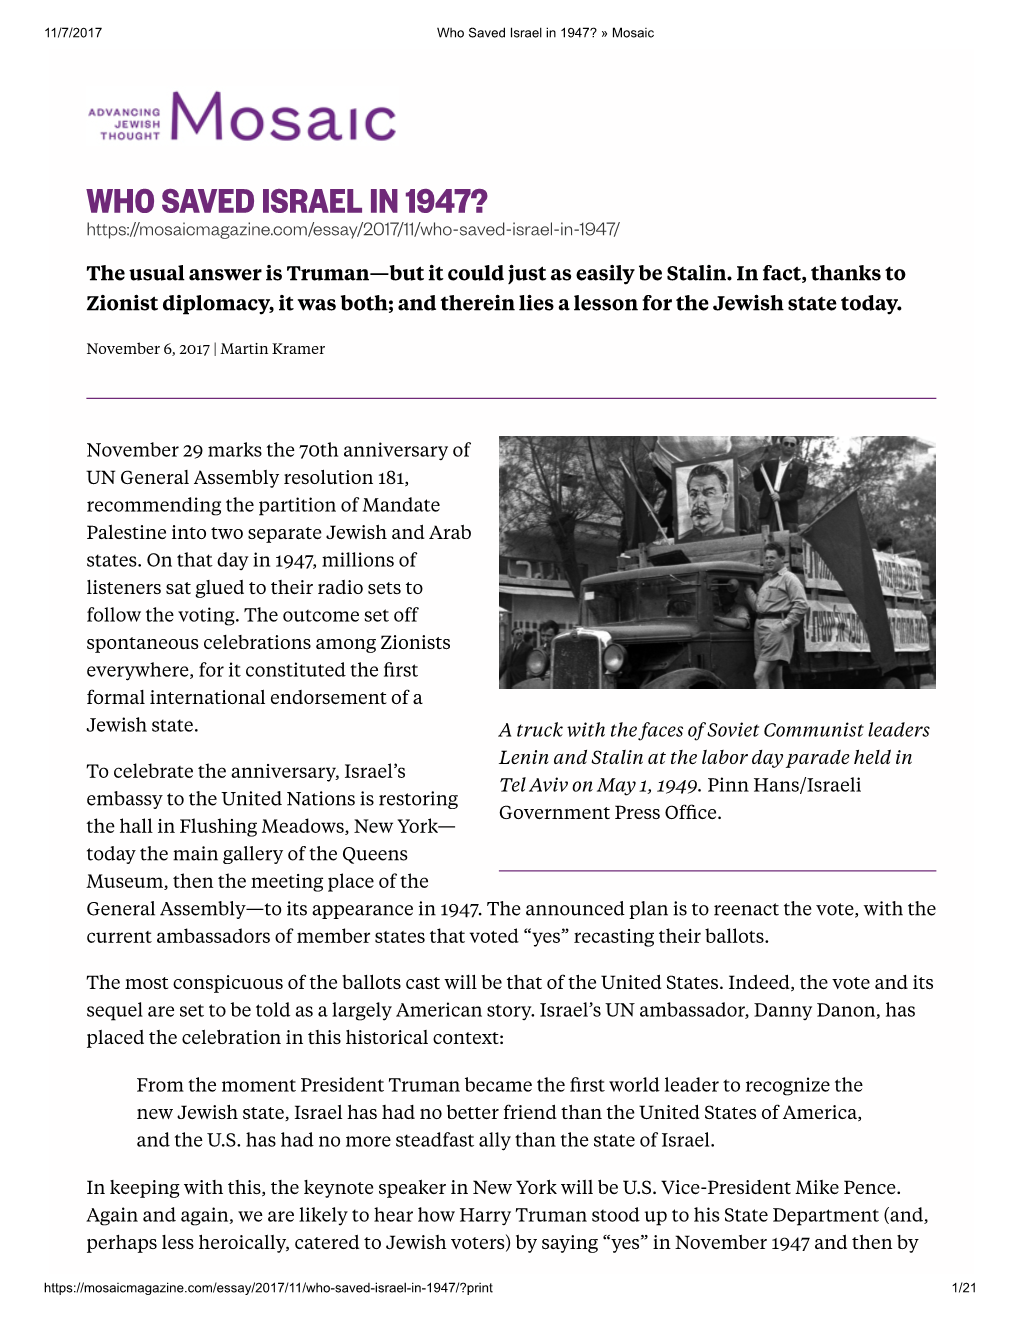 Who Saved Israel in 1947? (Pdf)